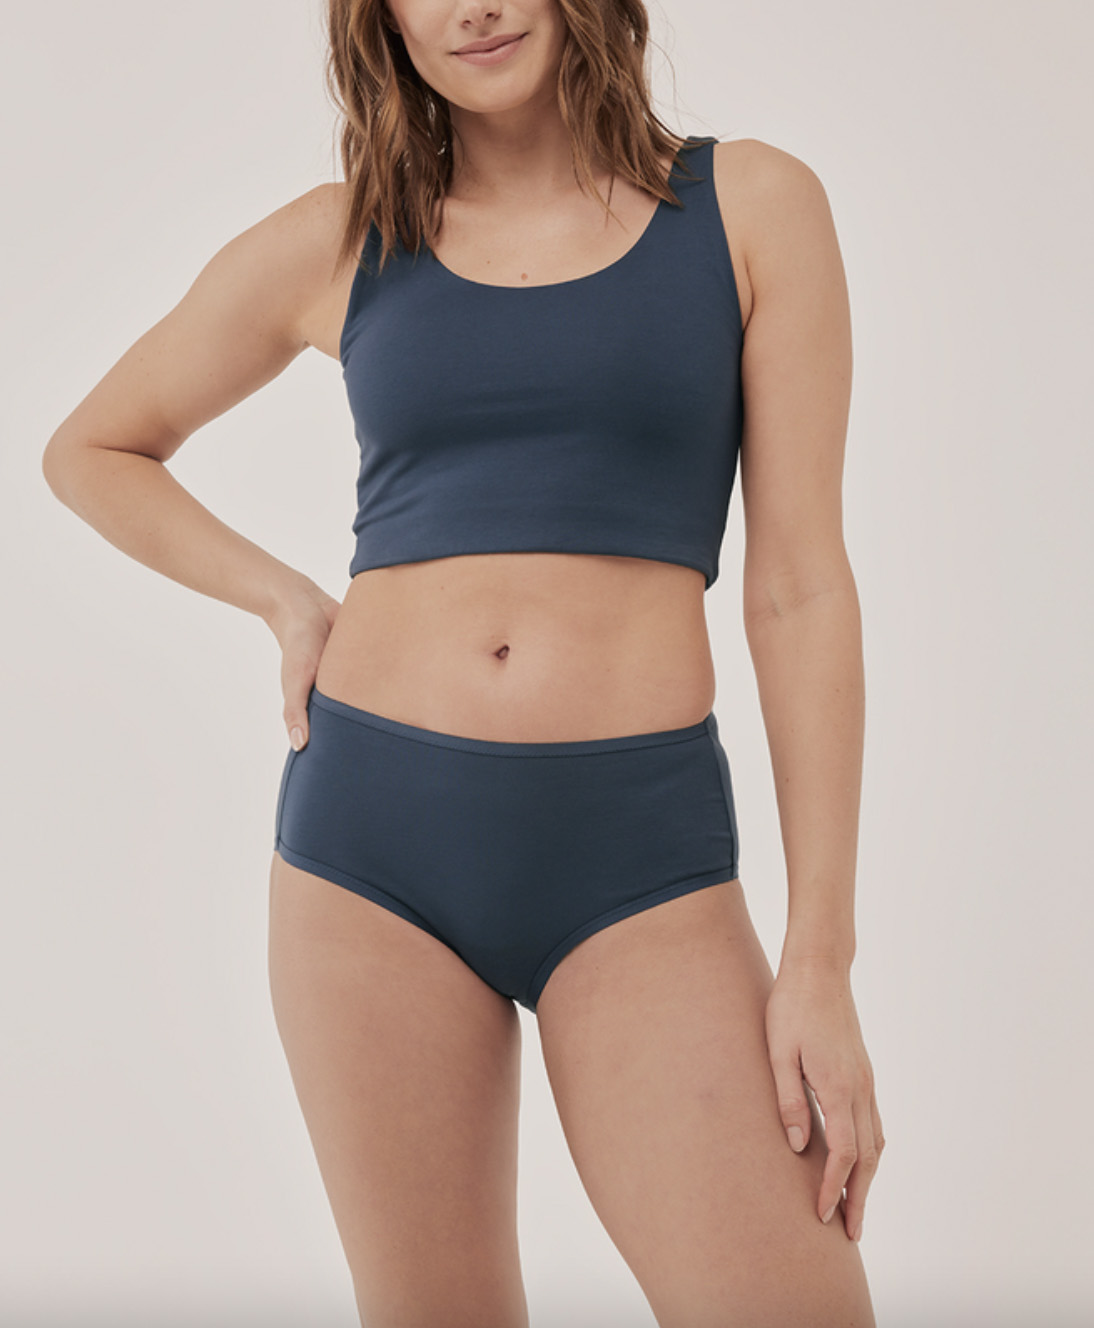 Embrace Comfort & Style with Racerback Bras! – The Bra Lab